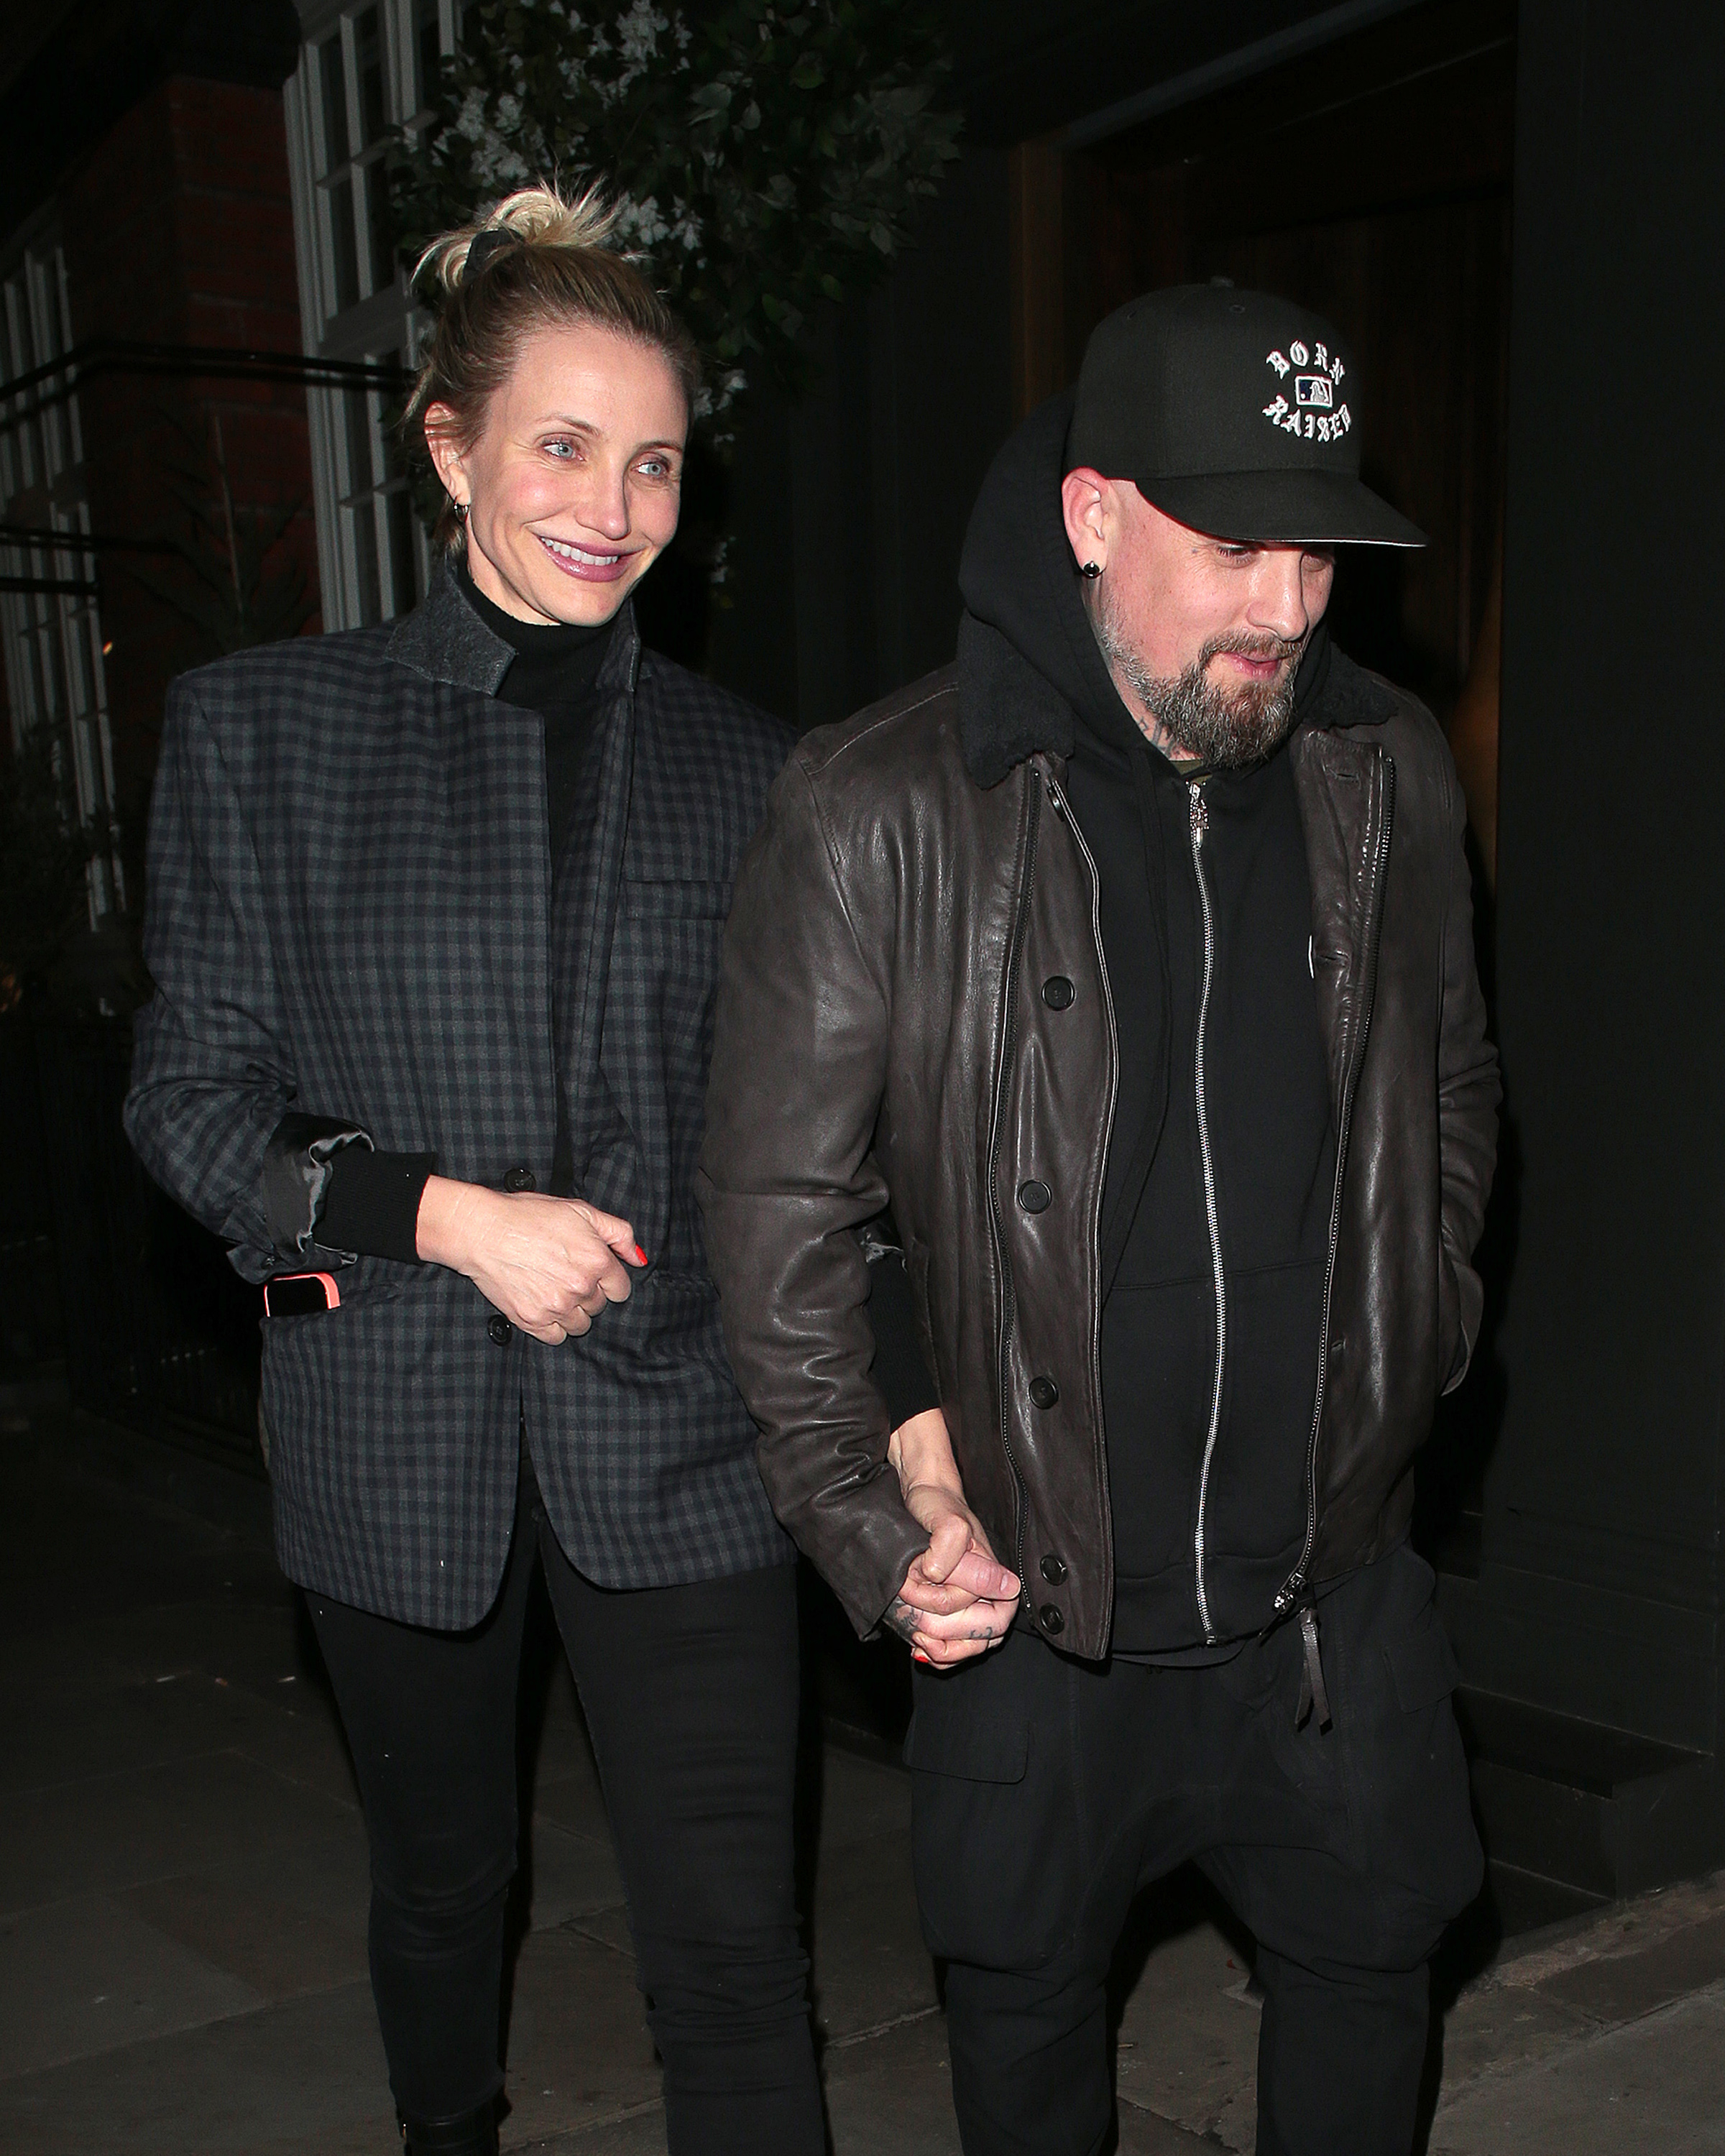 Cameron Diaz and Benji Madden out and about holding hands